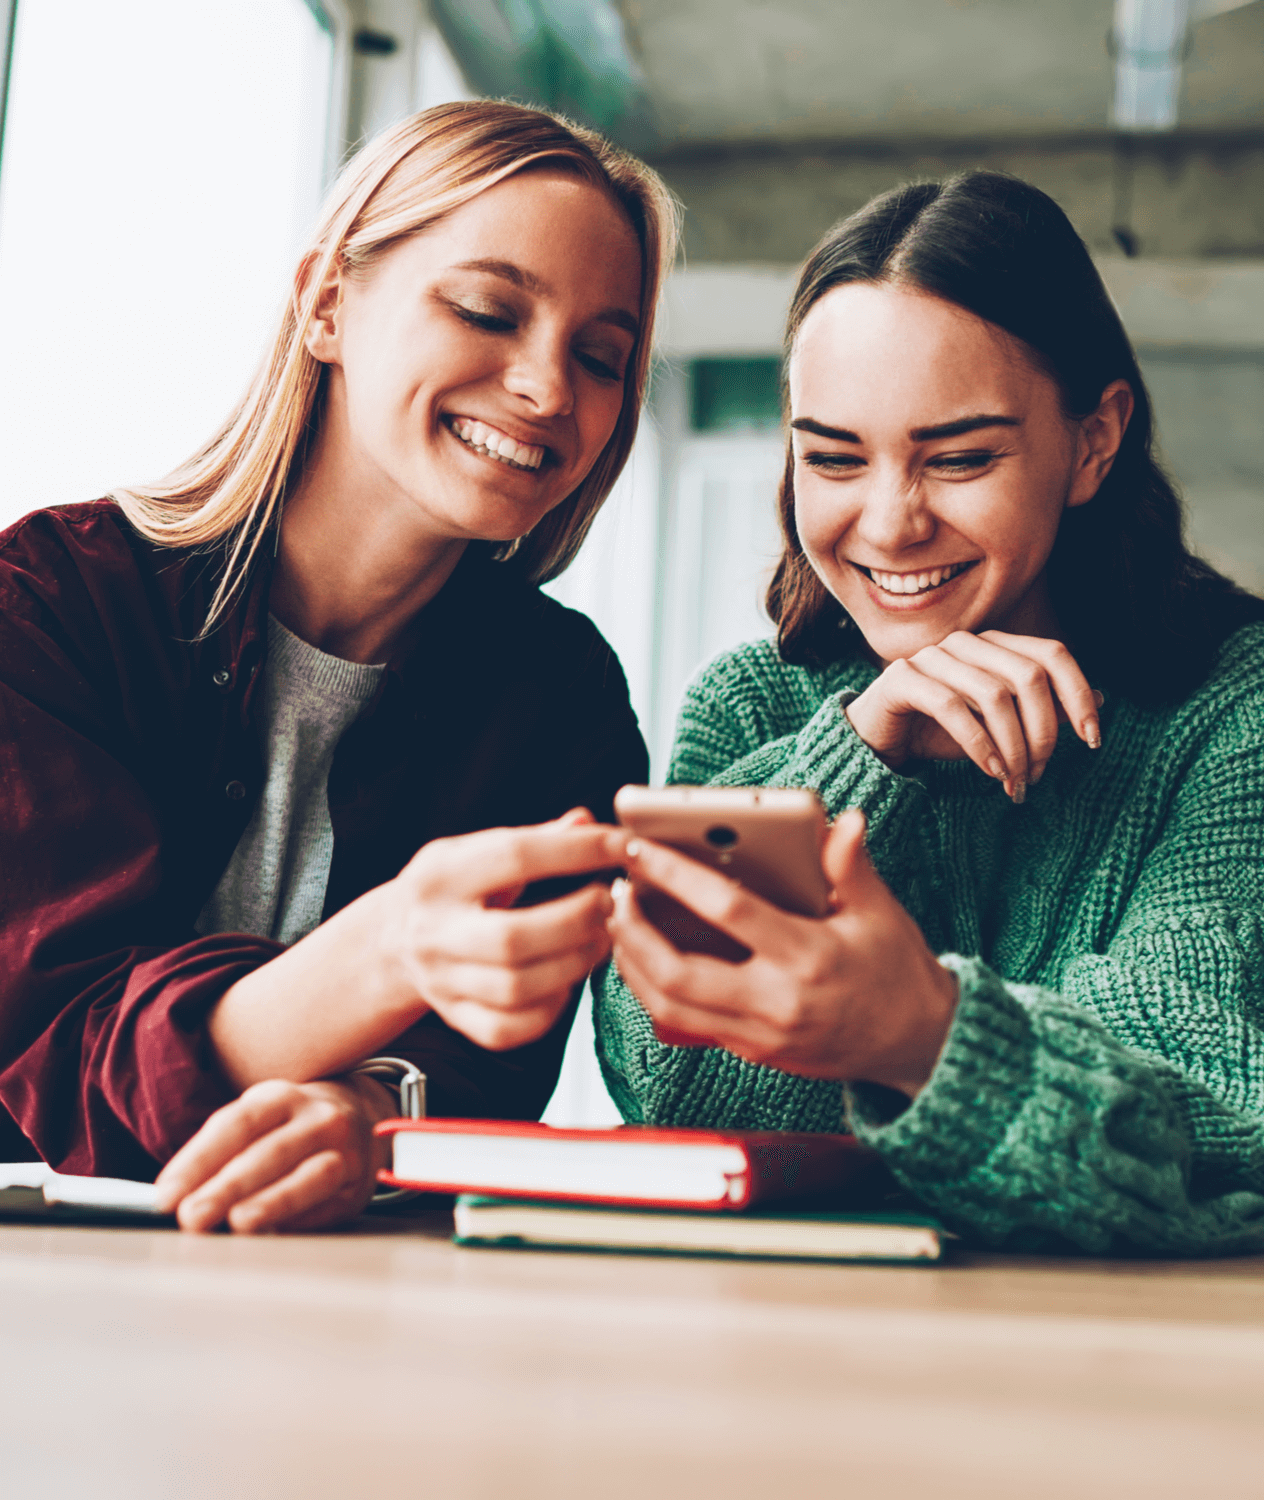 Two Caucasian women smile while looking at a cell phone.